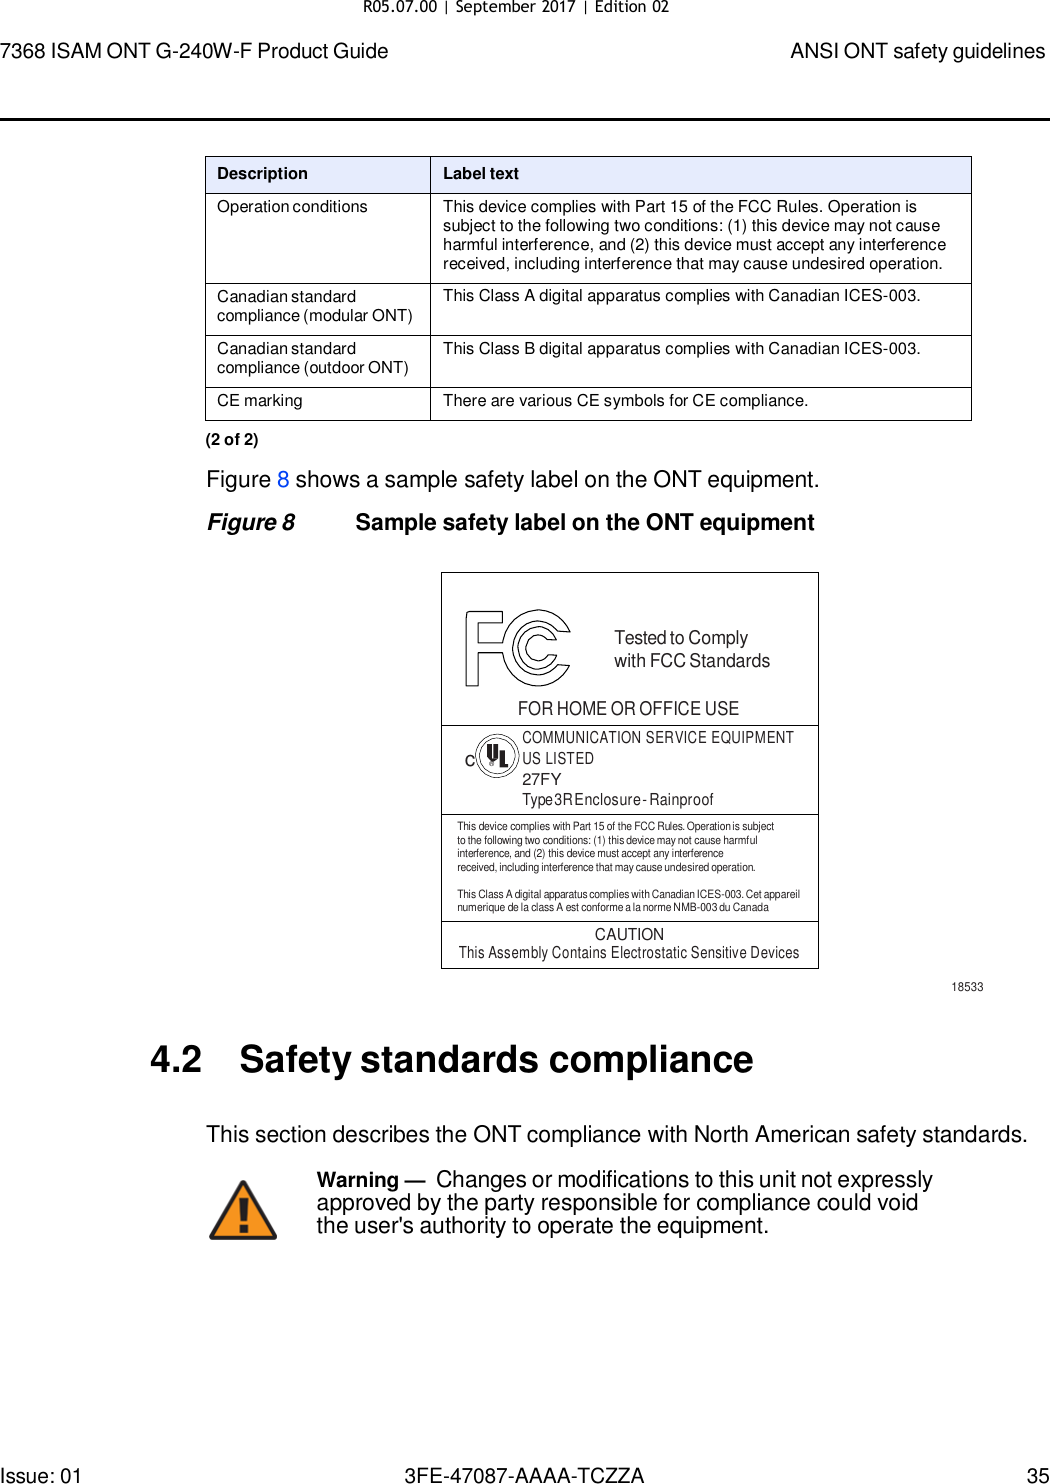 Page 32 of Nokia Bell G240WFV2 7368 ISAM GPON ONU User Manual 7368 ISAM ONT G 240W F Product Guide